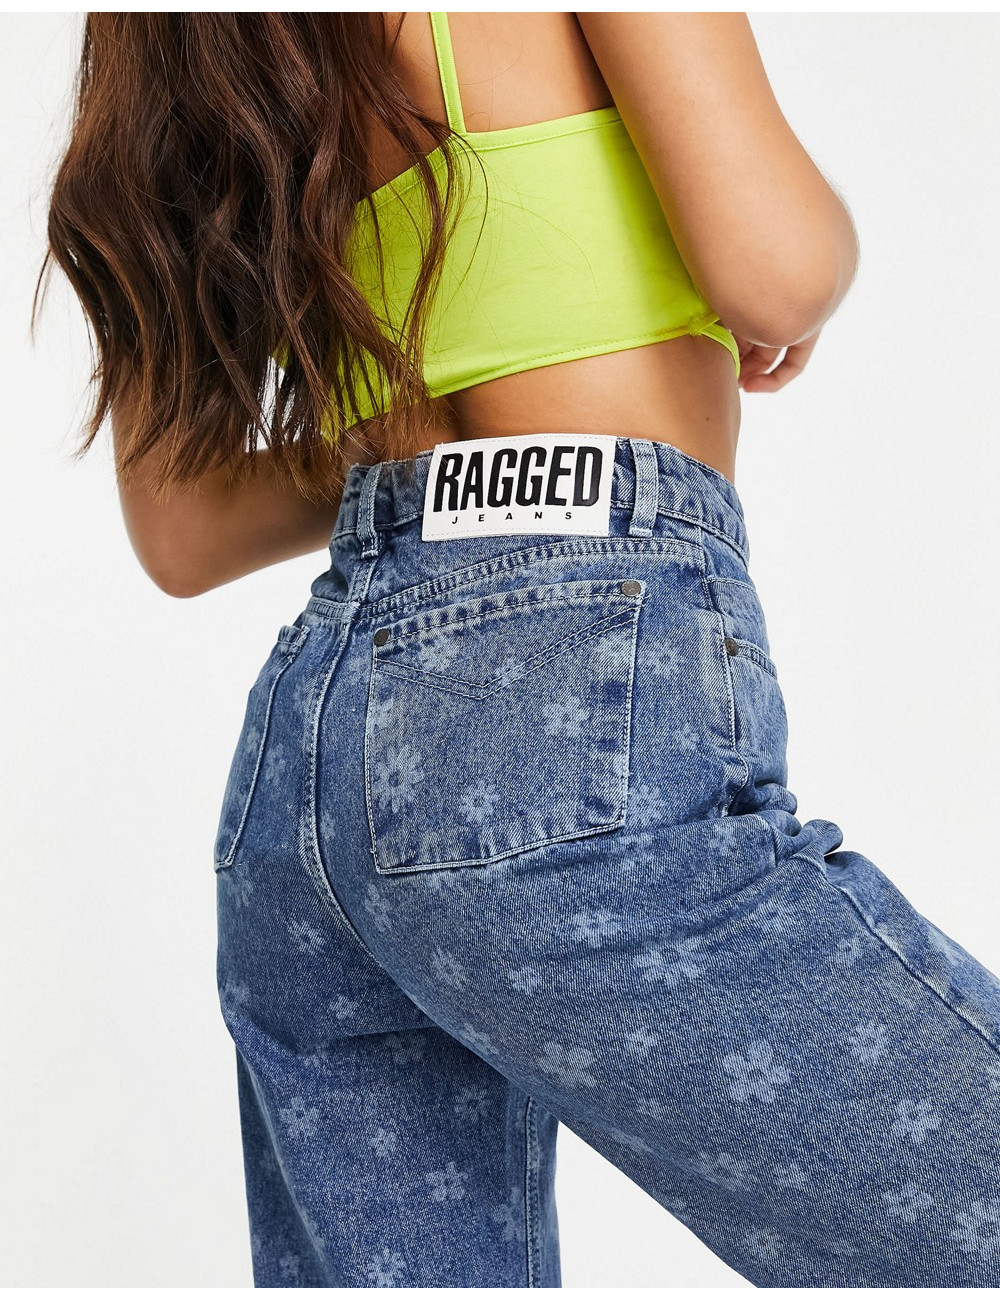 The Ragged Priest dad jeans...